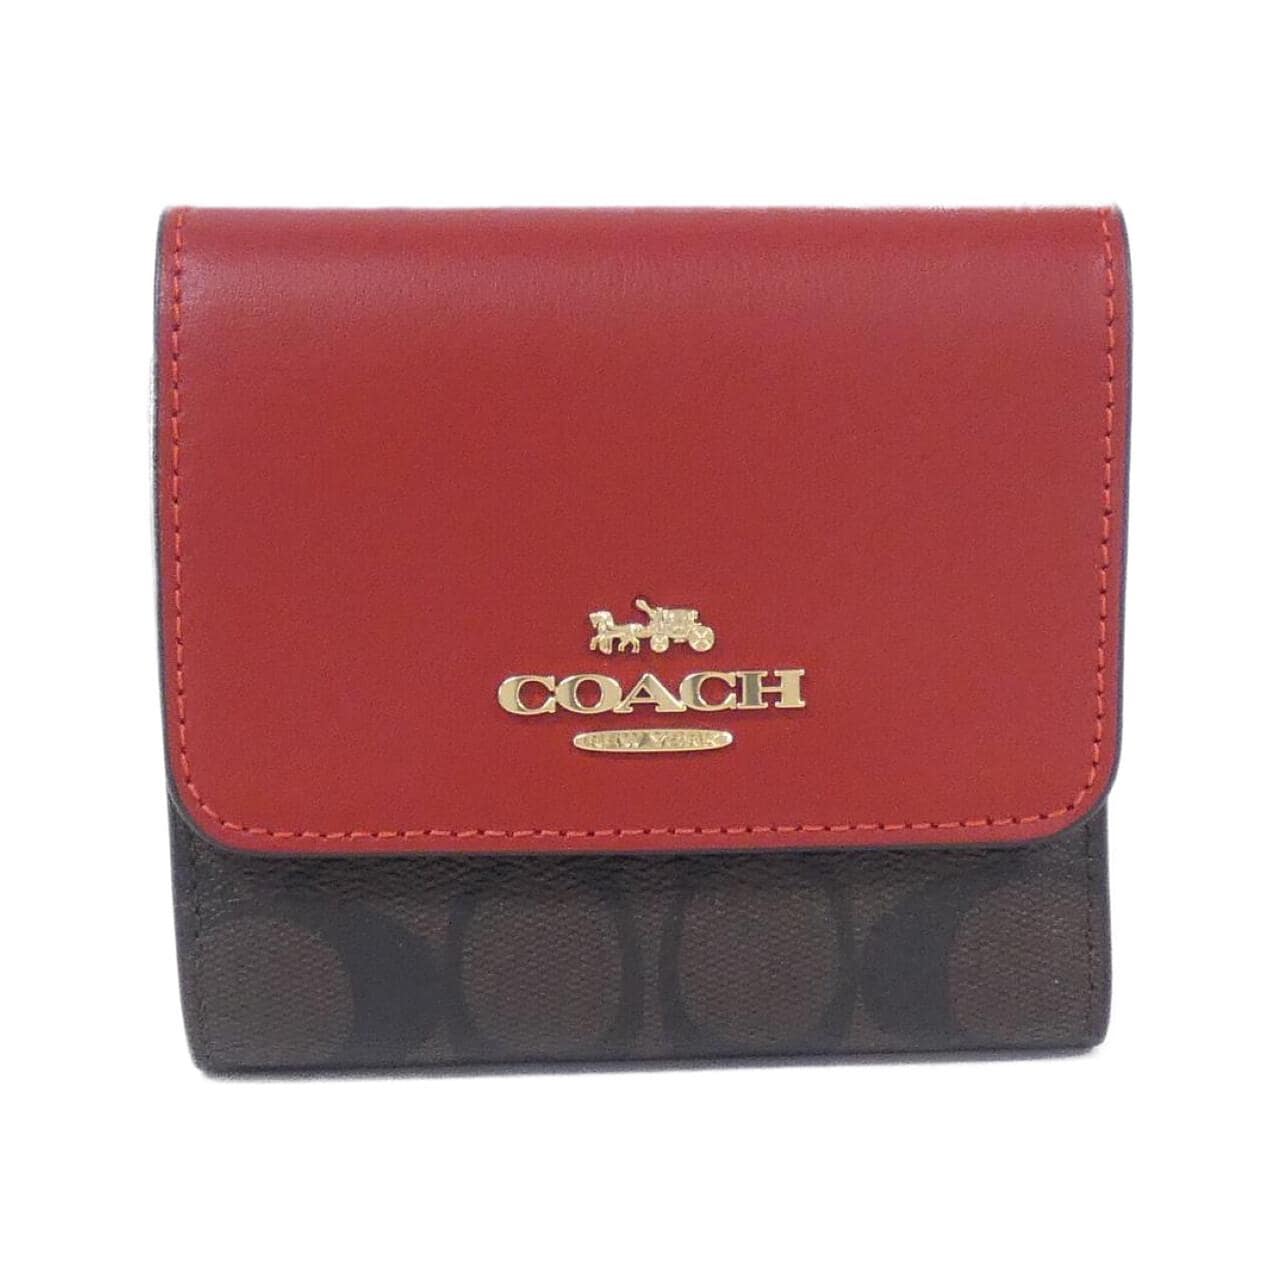 [BRAND NEW] Coach CE930 Wallet